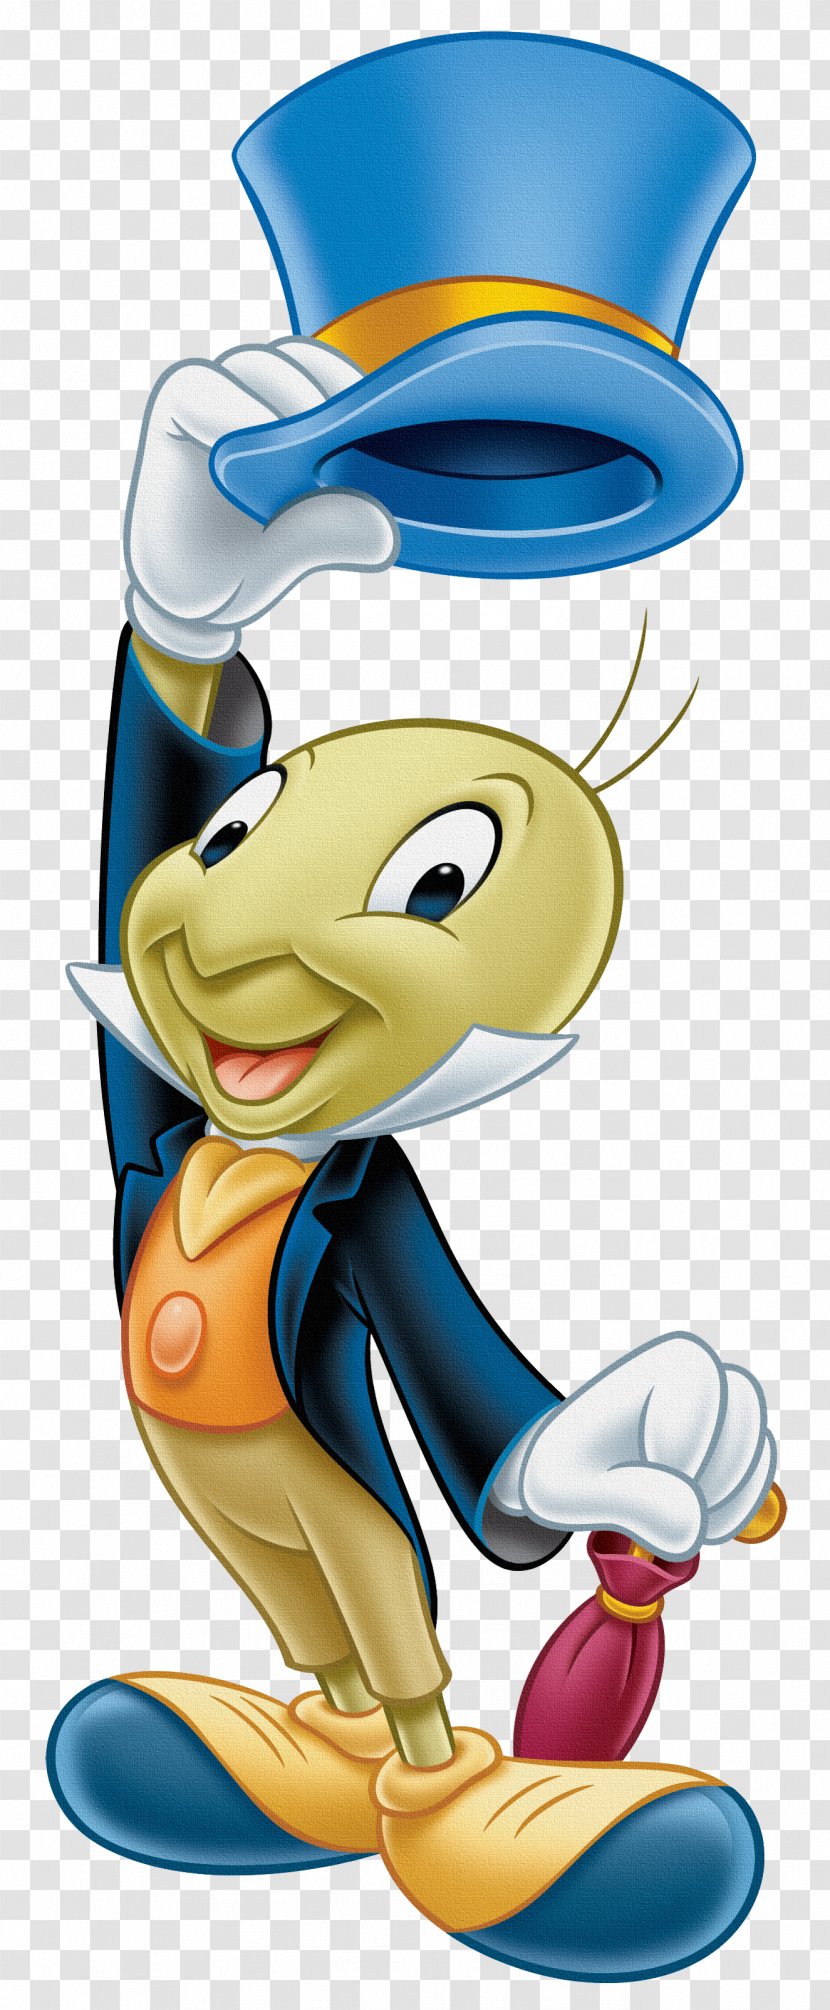 Jiminy Cricket Pinocchio The Talking Crickett Fairy With Turquoise Hair Figaro - Fictional Character - Transparent Clipart Transparent PNG